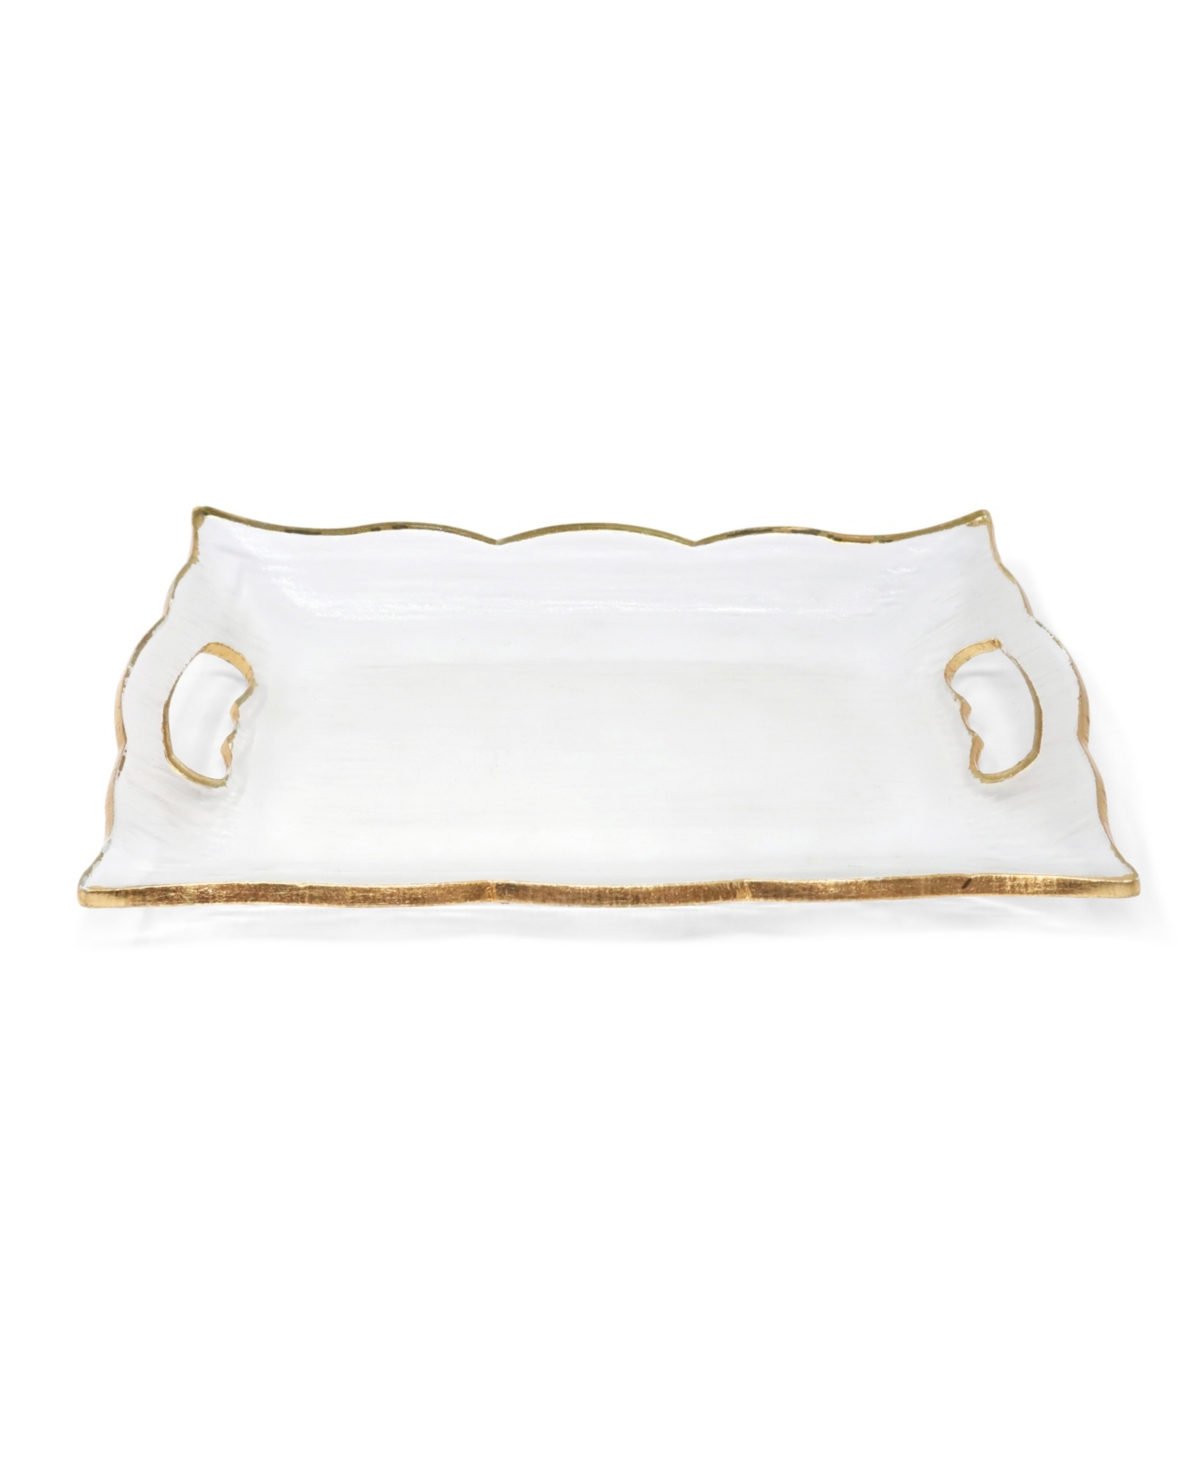 Rectangular Glass Tray with Handles and Gold-Tone Rim, 13.75" - Gold